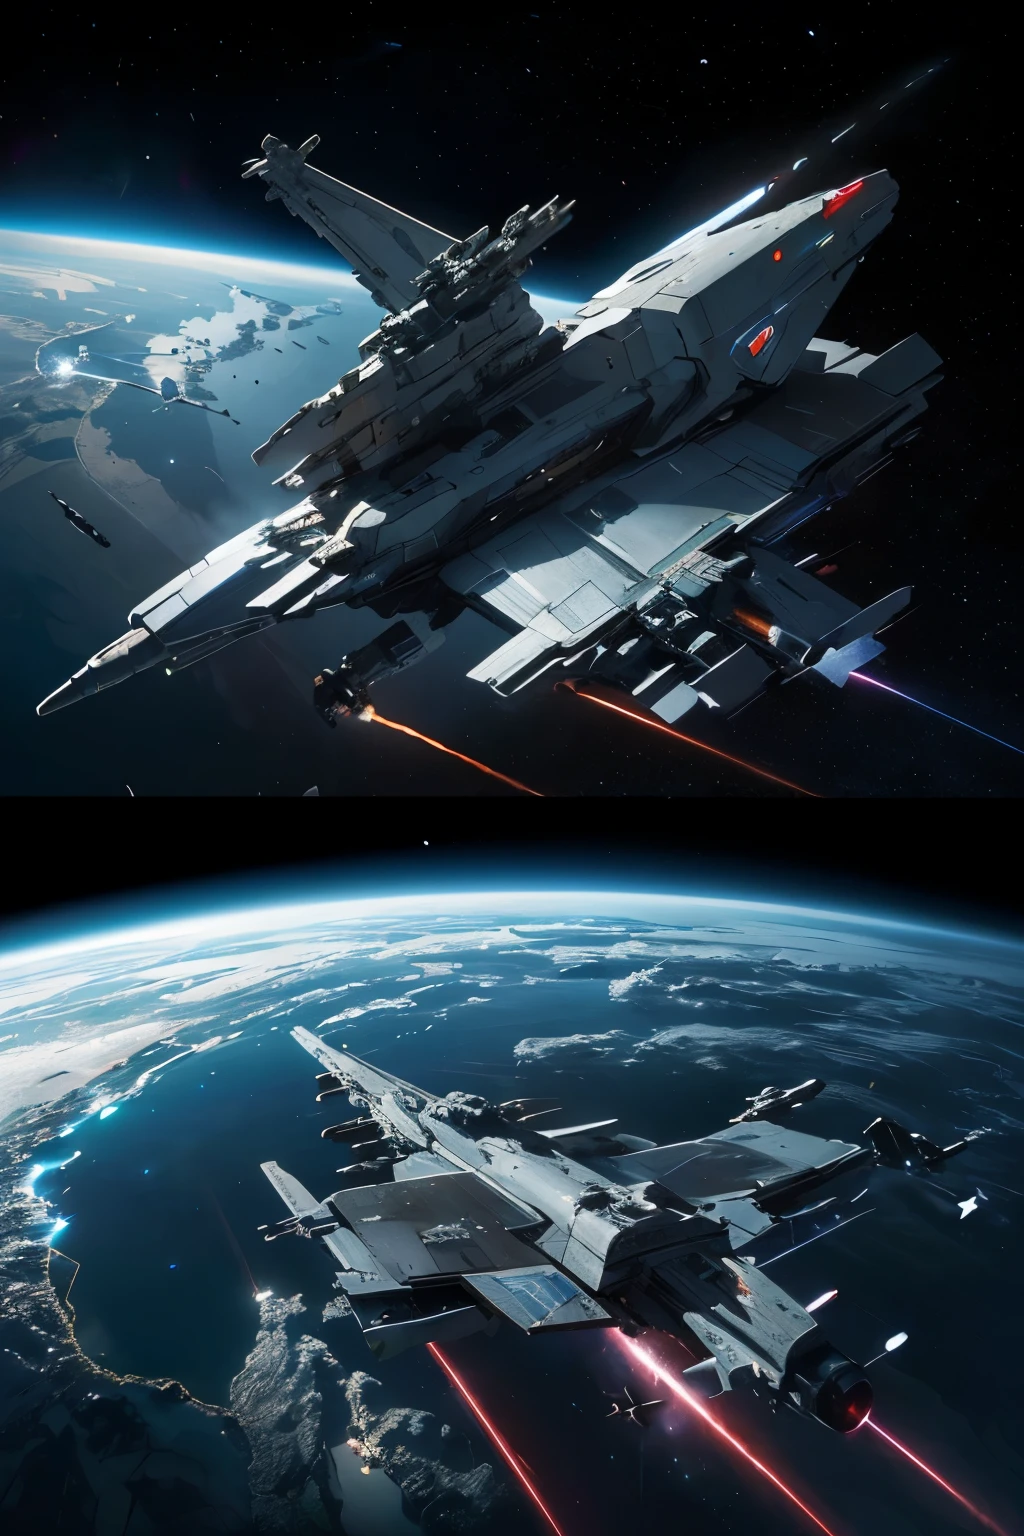 ((Epic Space War Masterpiece)), ((High-Resolution Galactic Conflict)), ((hyper-realistic Starfleet Battles)), (detailed Spacecraft Destructions), (Photorealistic:2.0), Spacemen in combat suits, (futuristic), (alien species), (advanced weapons), (energy shields), (laser blasts), (planetary ground assaults), (space-drifting debris), (cosmic backdrop), (Neon-lit starships), (holographic interface), (high-tech control consoles), (ai-driven starfighters), (stellar explosions), (dark matter effects), (warp speed